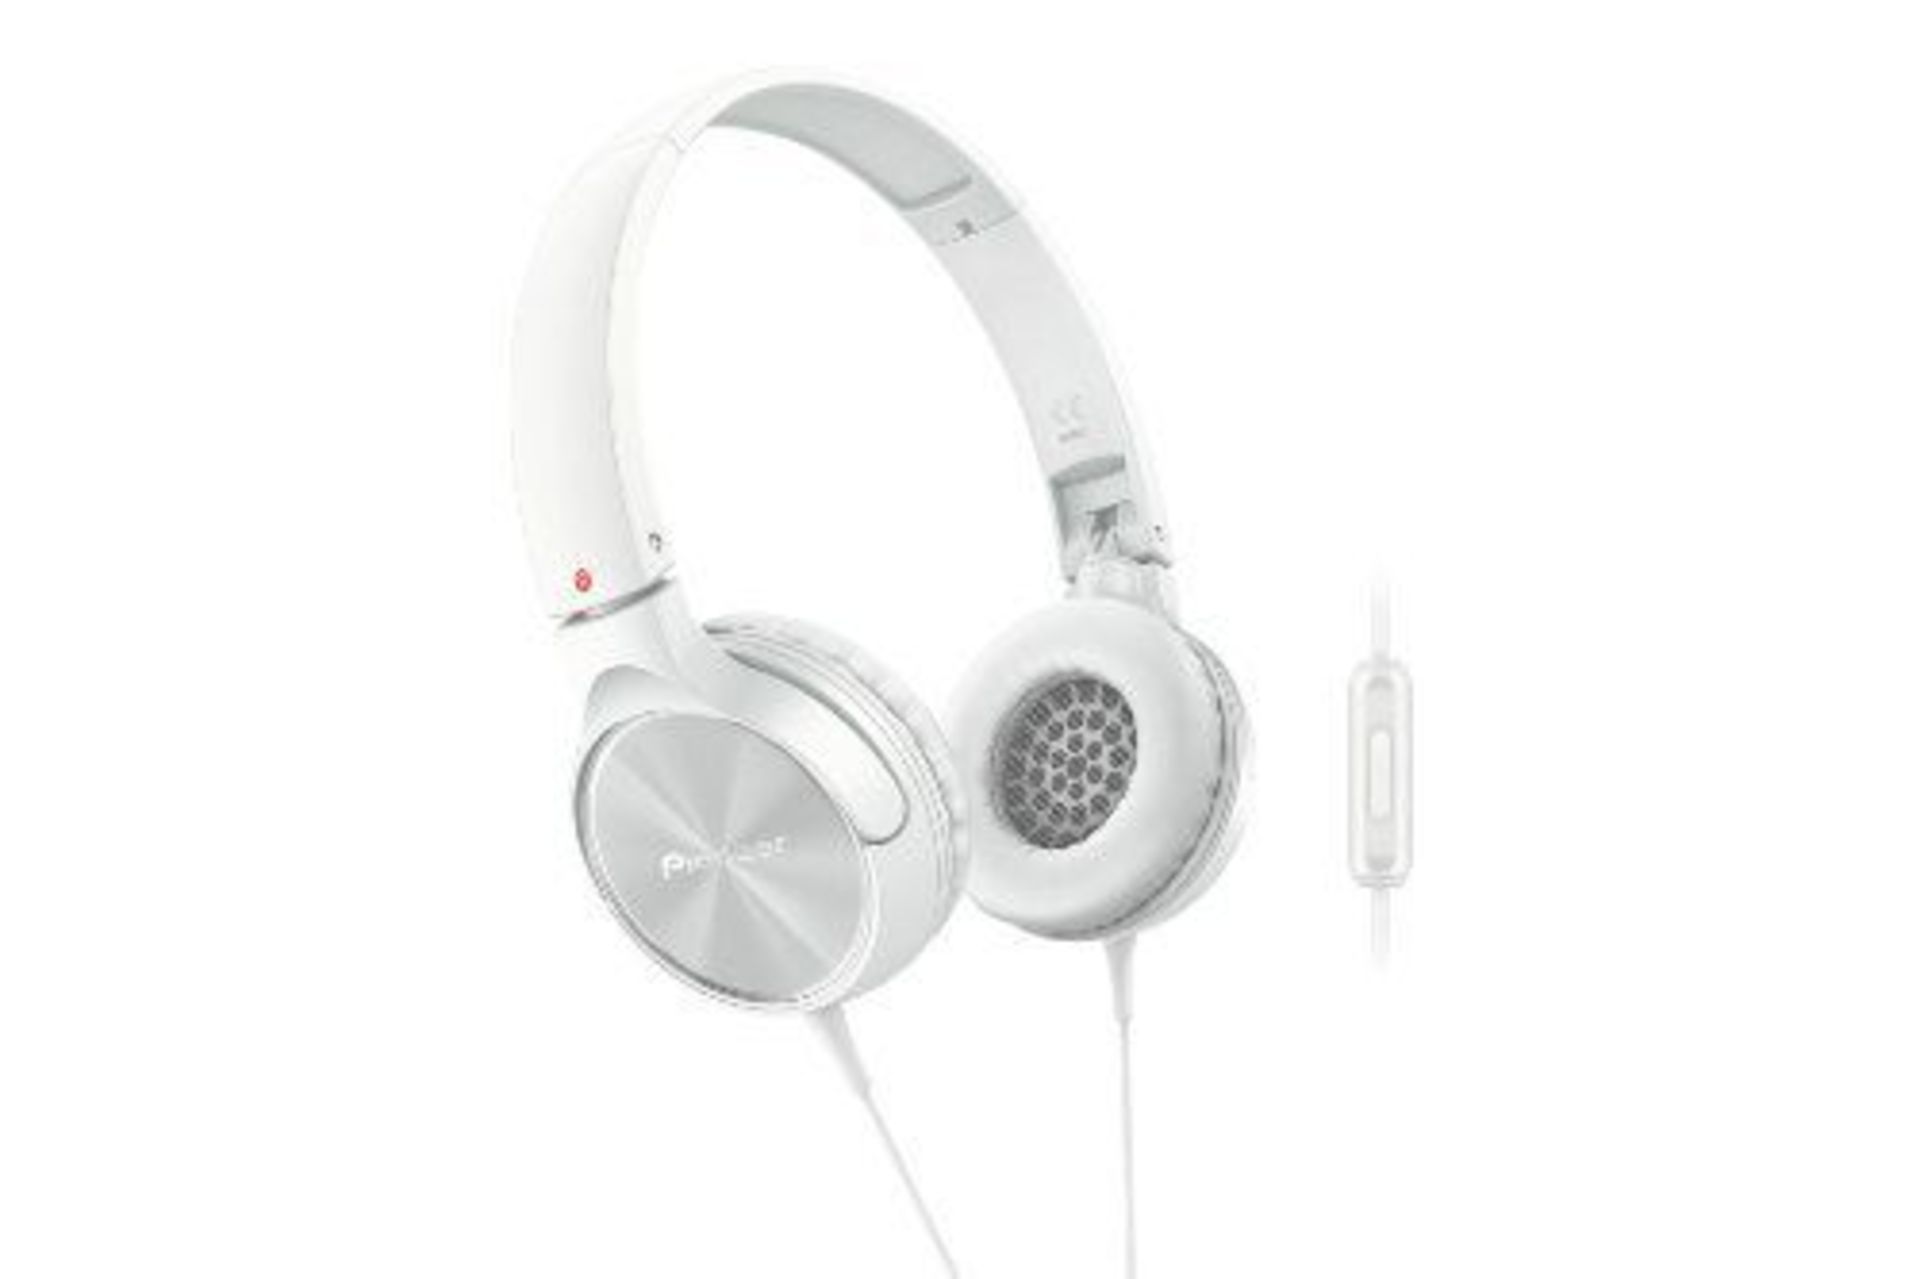 V Brand New Pioneer SE-MJ522T-W Fully Enclosed Dynamic Headphones With Microphone - White - Foldable